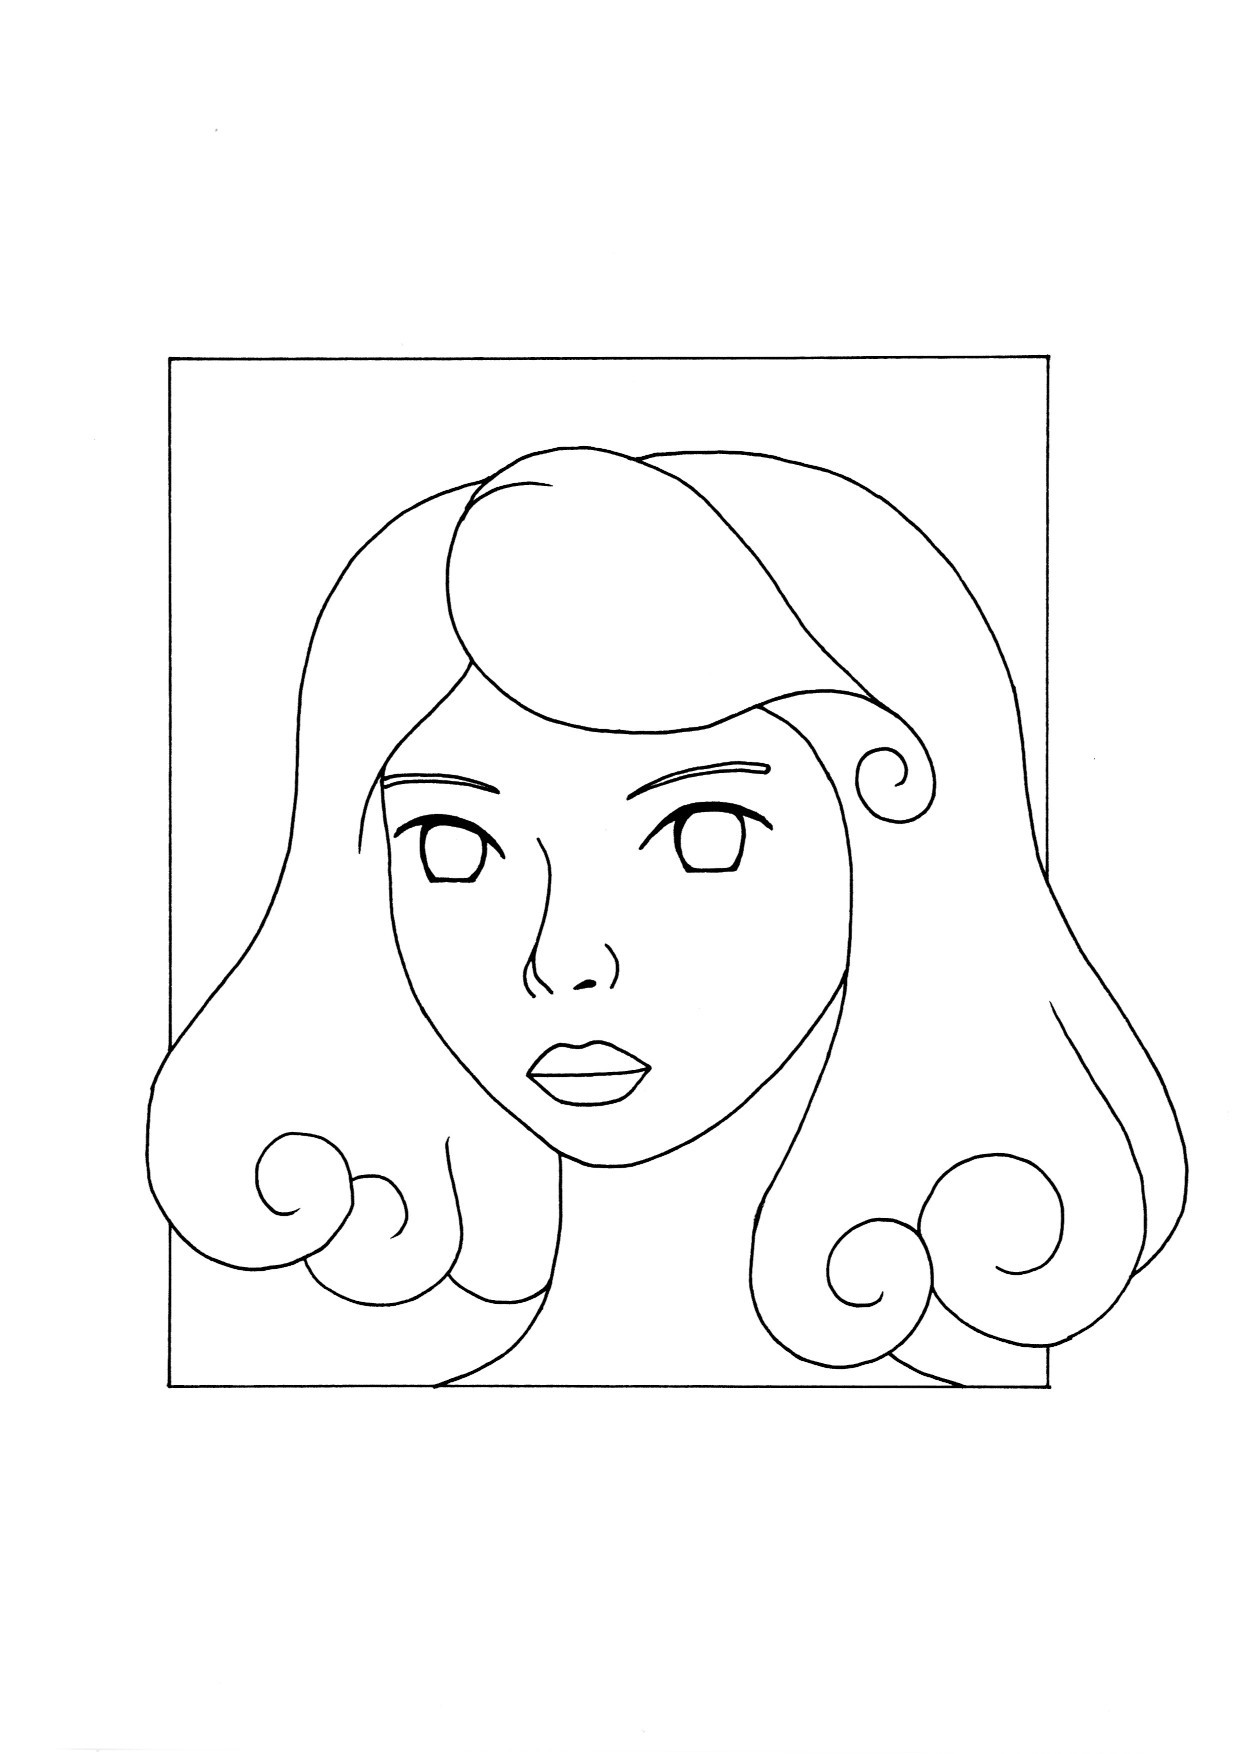 Coloring Page: Head in comic-book style